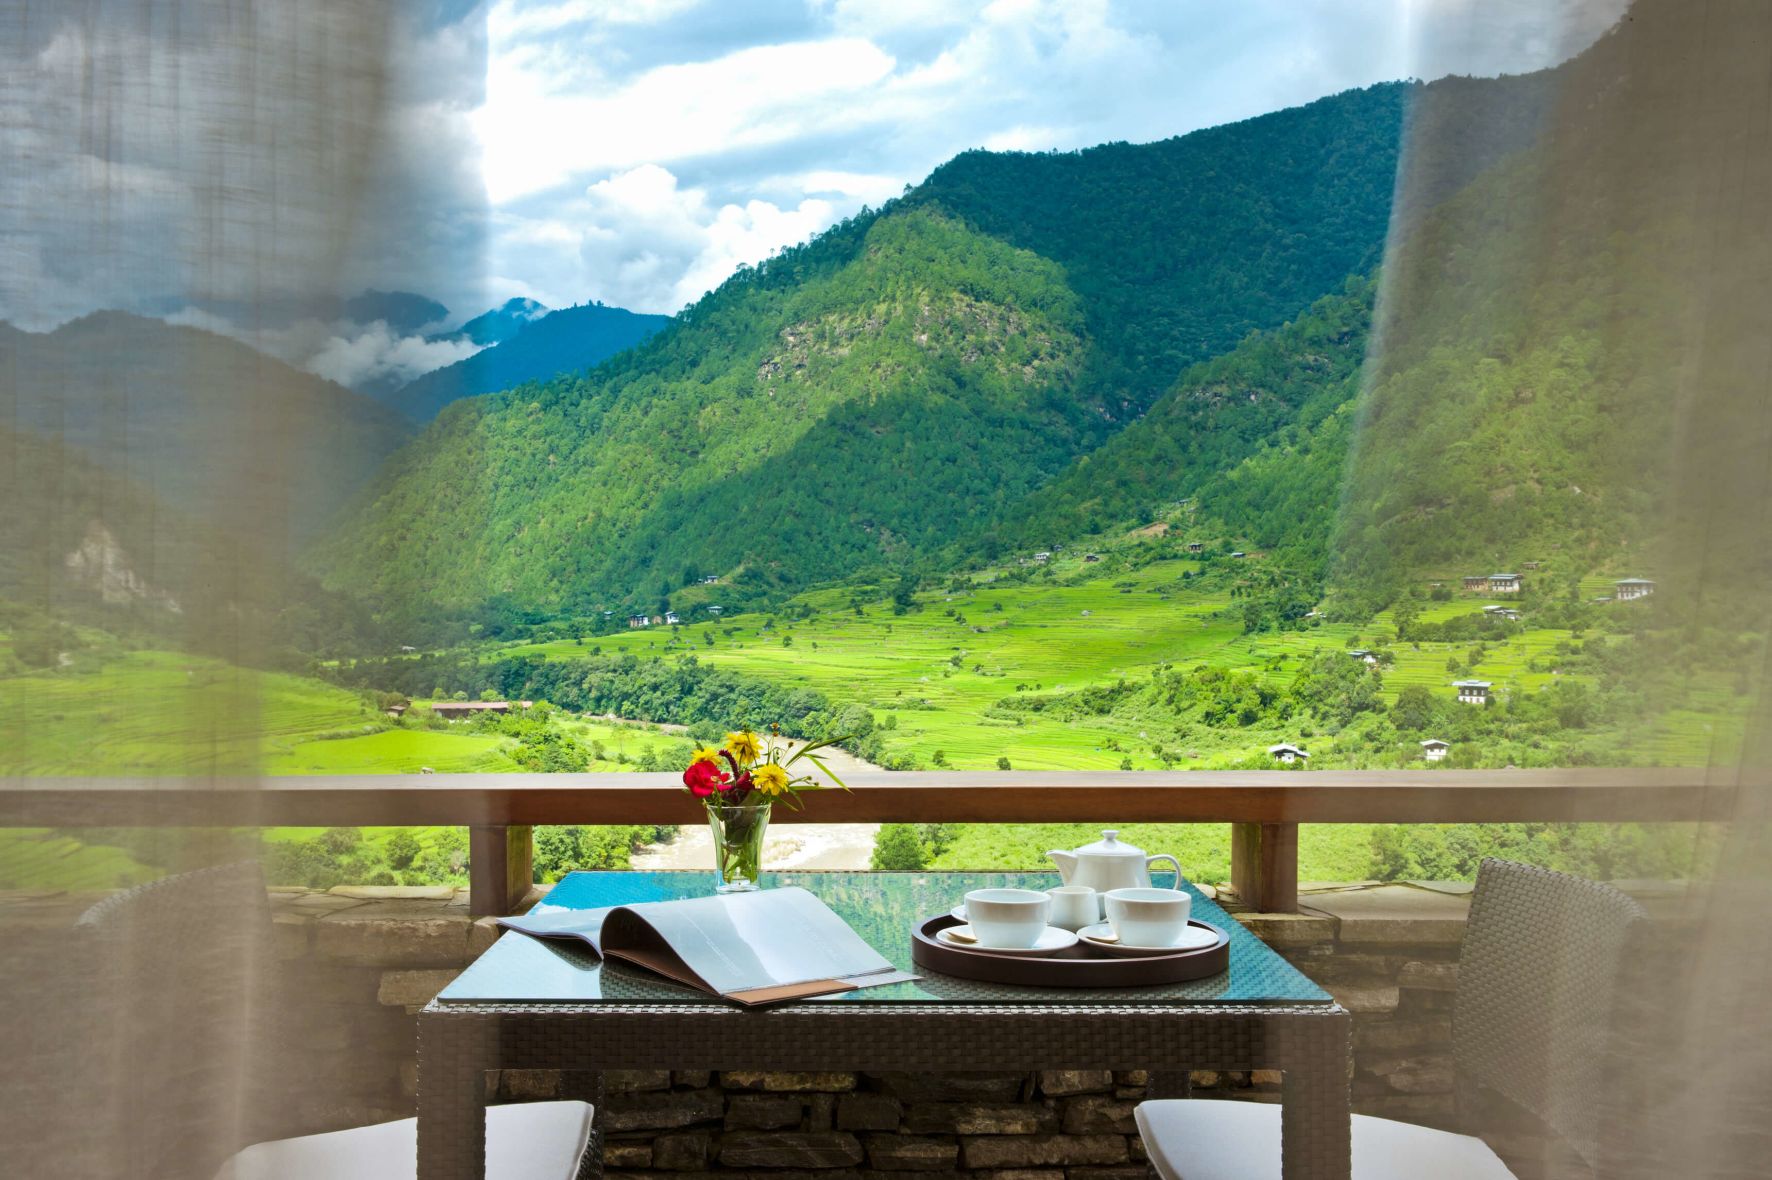 A Table With A Laptop On It In Front Of A Valley